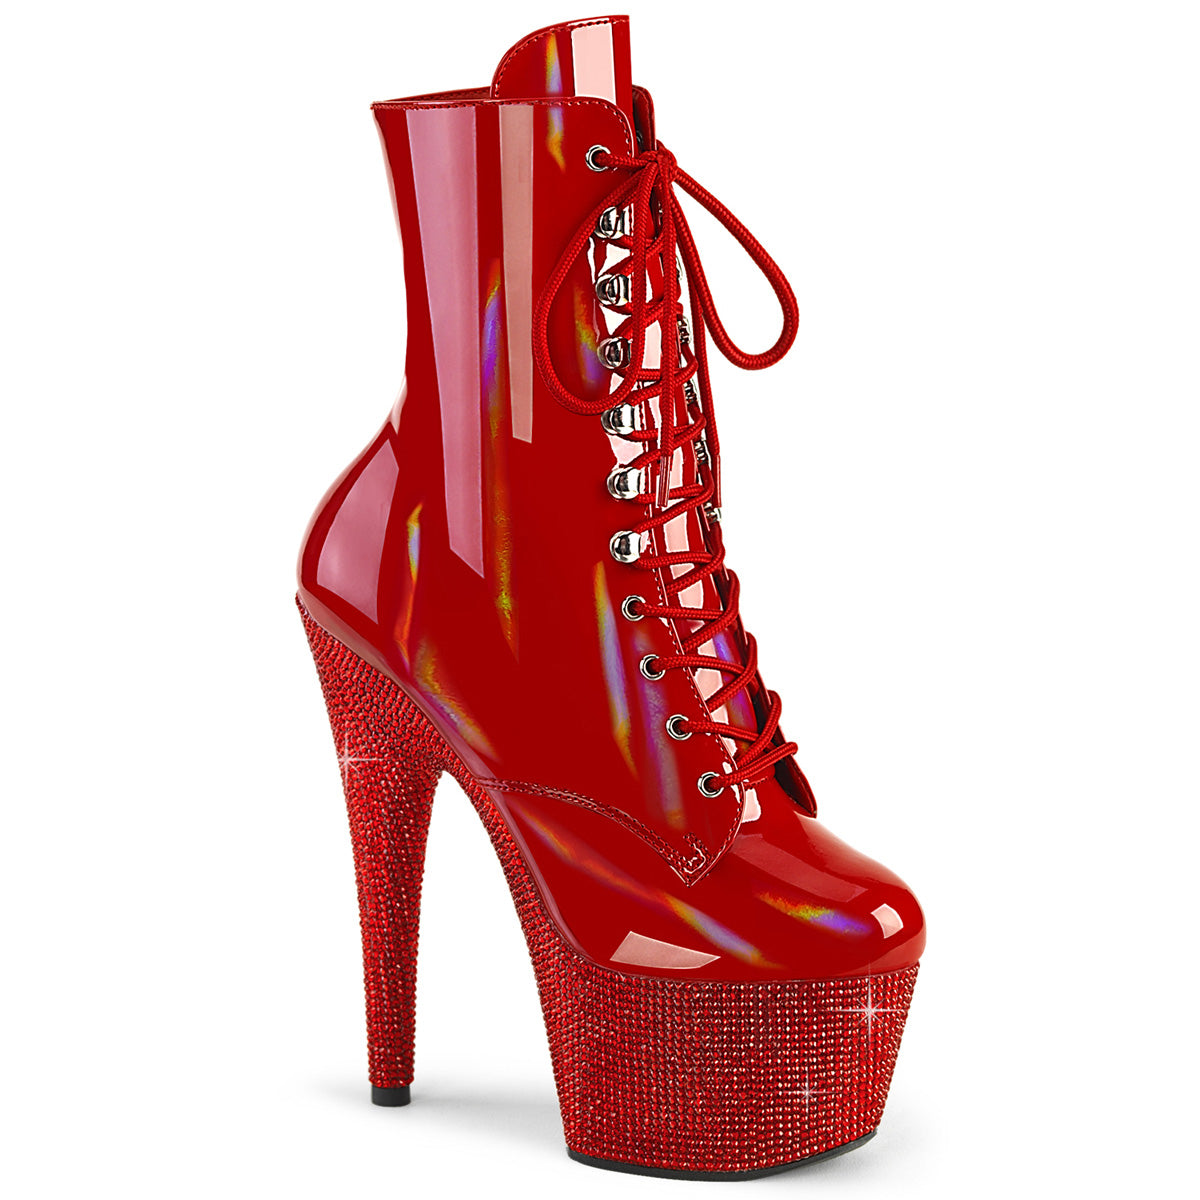 PLEASER BEJEWELED 1020-7 RED RHINESTONE 7 INCH HIGH HEEL ANKLE BOOTS SIZE 7 USA SALE